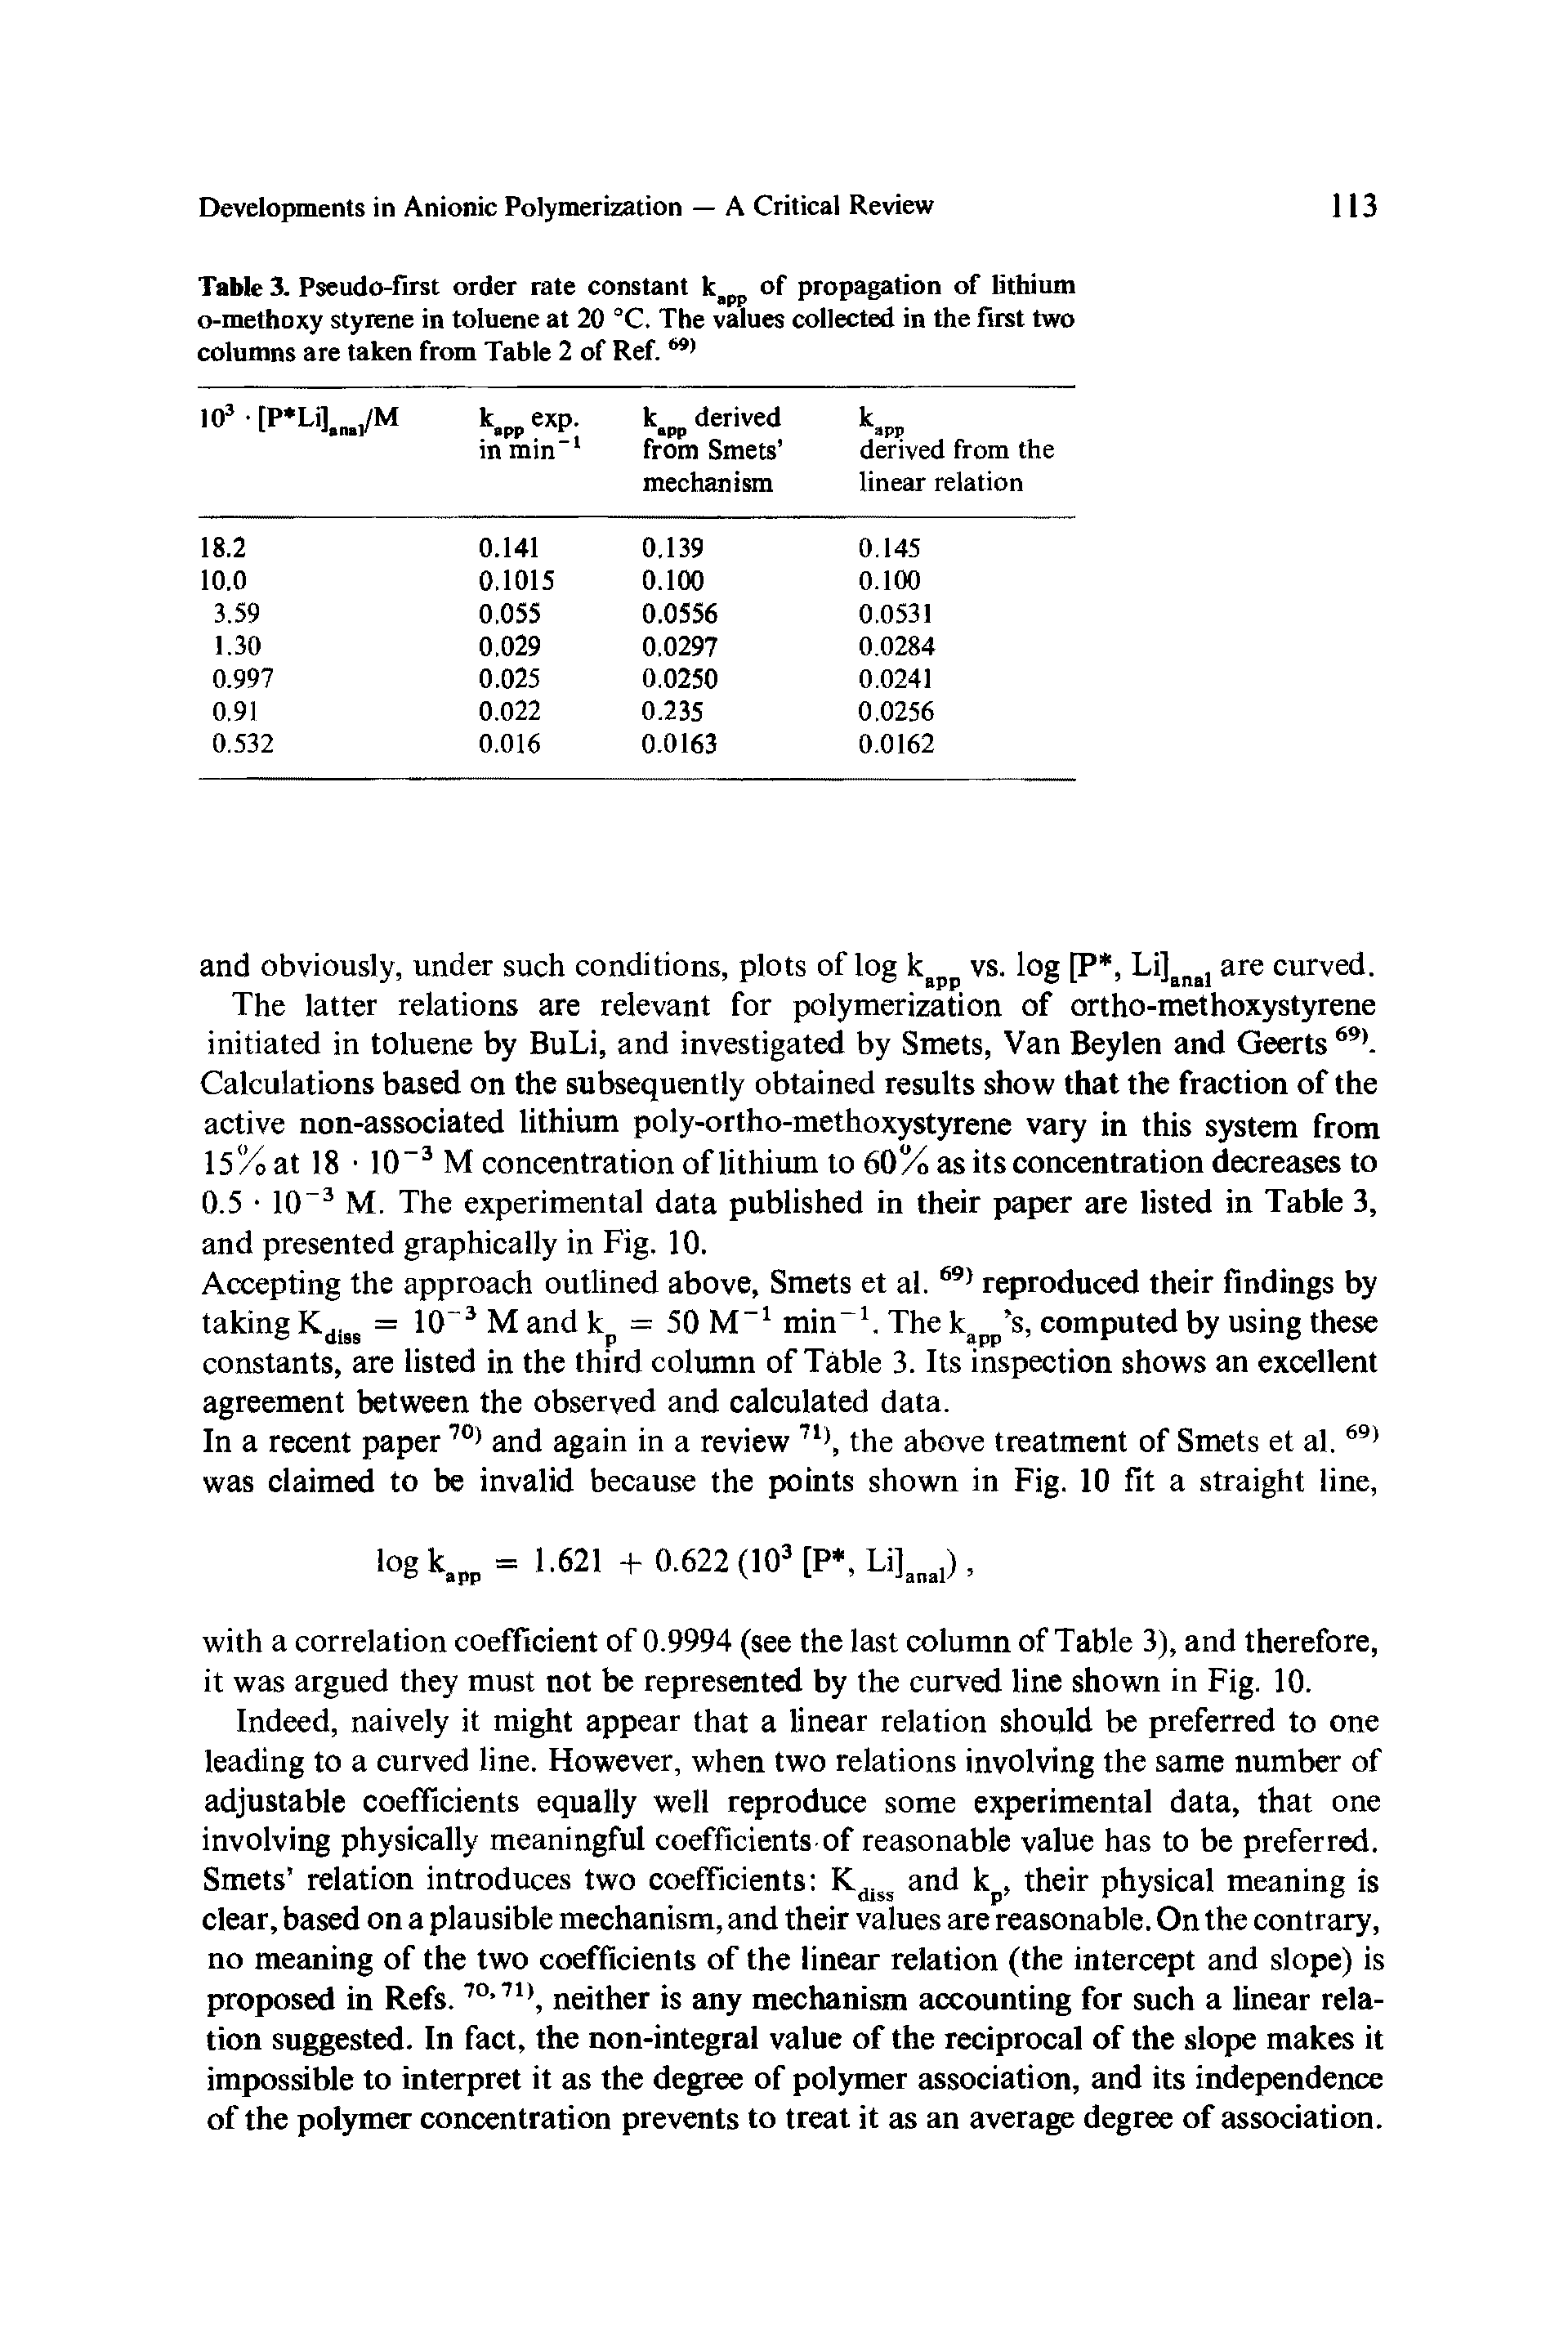 Table 3. Pseudo-first order rate constant kapp of propagation of lithium o-methoxy styrene in toluene at 20 °C. The values collected in the first two columns are taken from Table 2 of Ref. 69)...